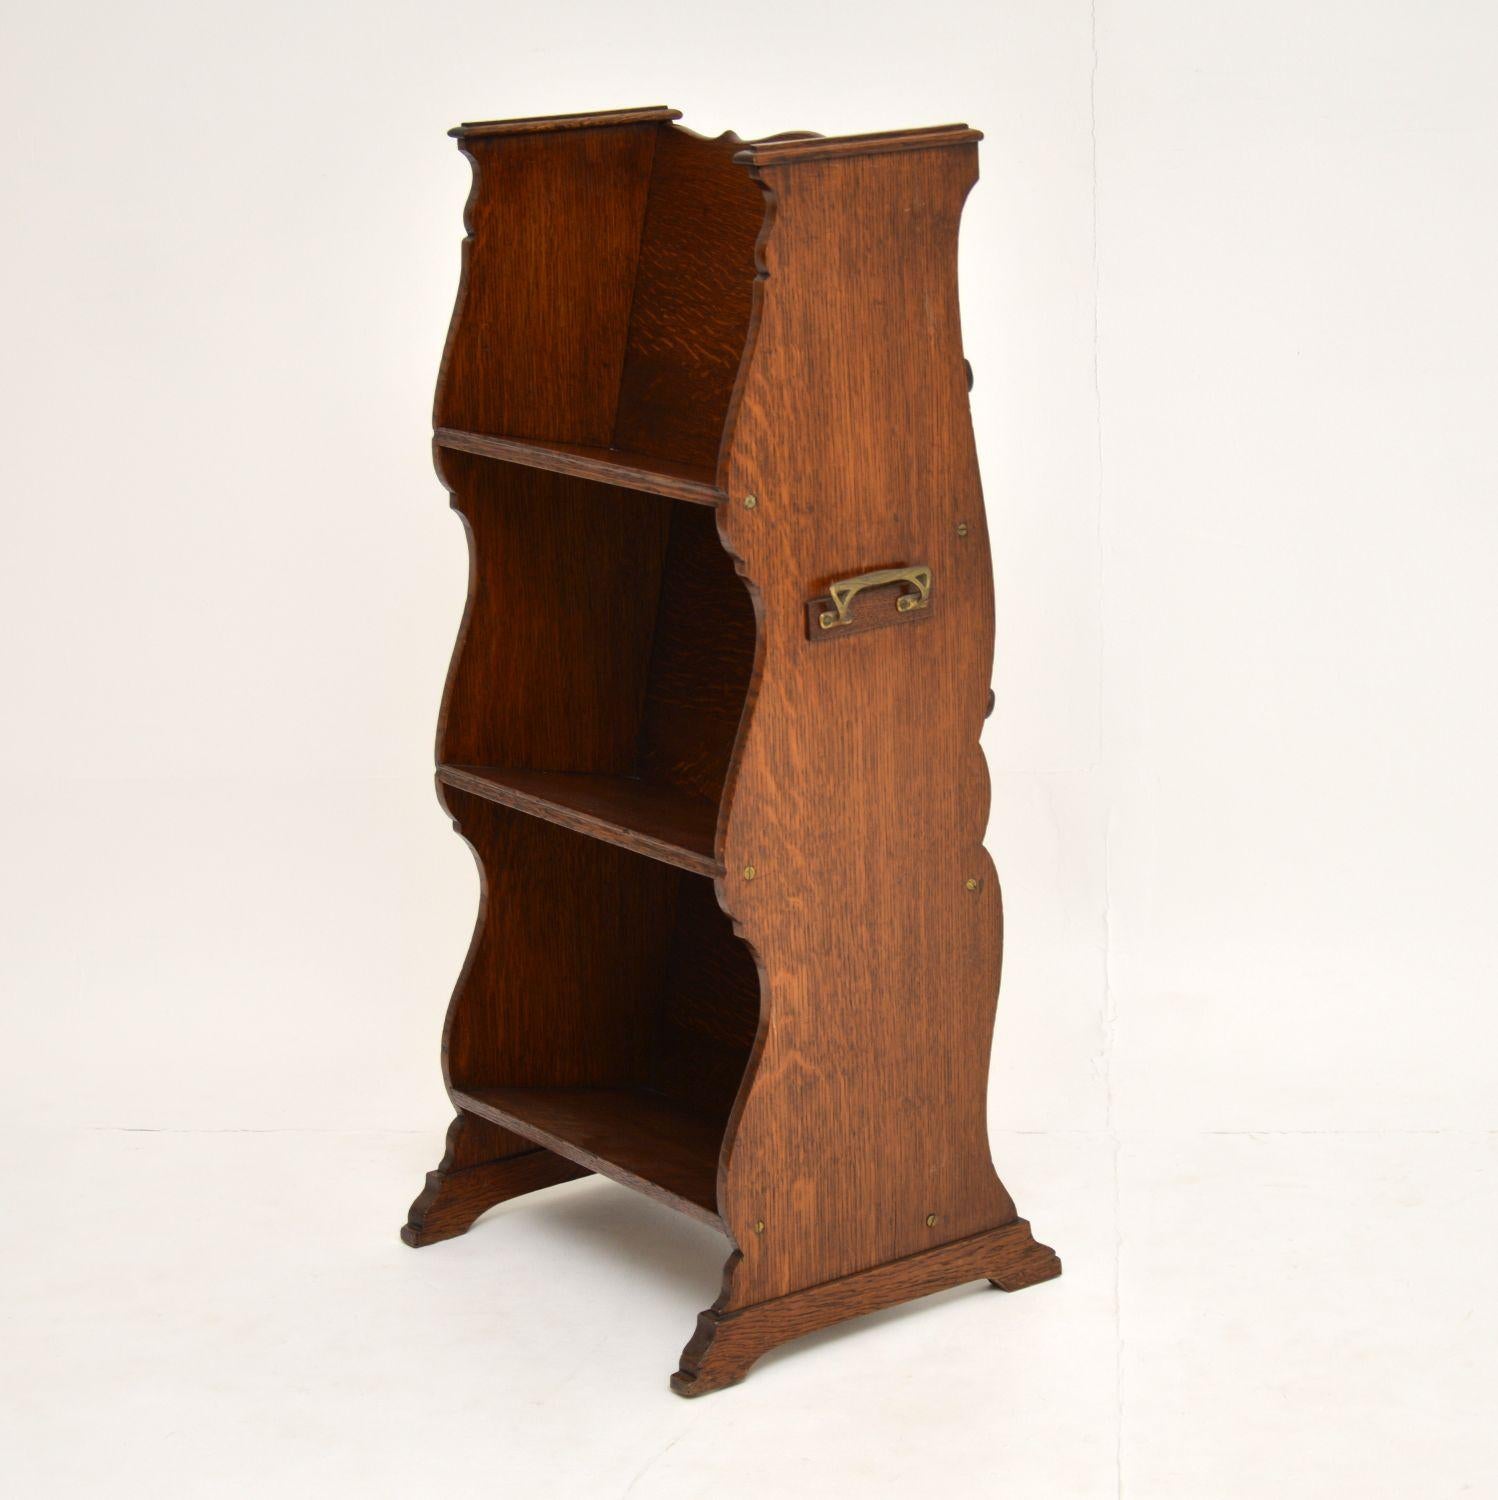 A very beautiful and useful little Arts & Crafts period bookcase in solid oak. This dates from circa 1890-1900 period.

It is in lovely original condition, with only some extremely minor wear.

As well as shelves on the front, this has three